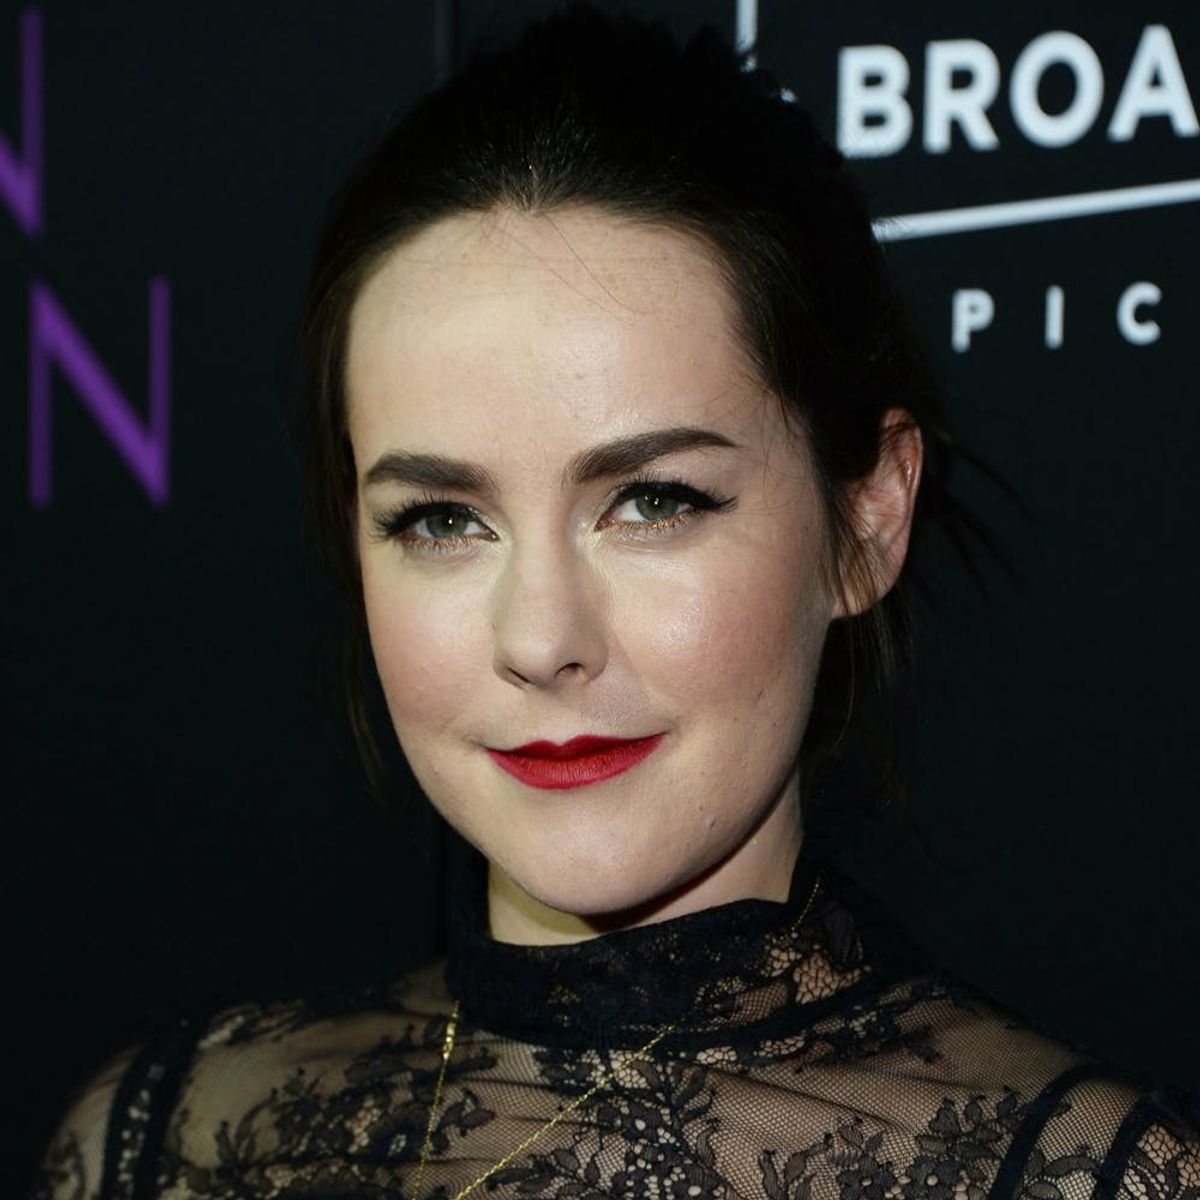 Jena Malone’s Newborn Baby Is Already the Biggest Fan of Her Music